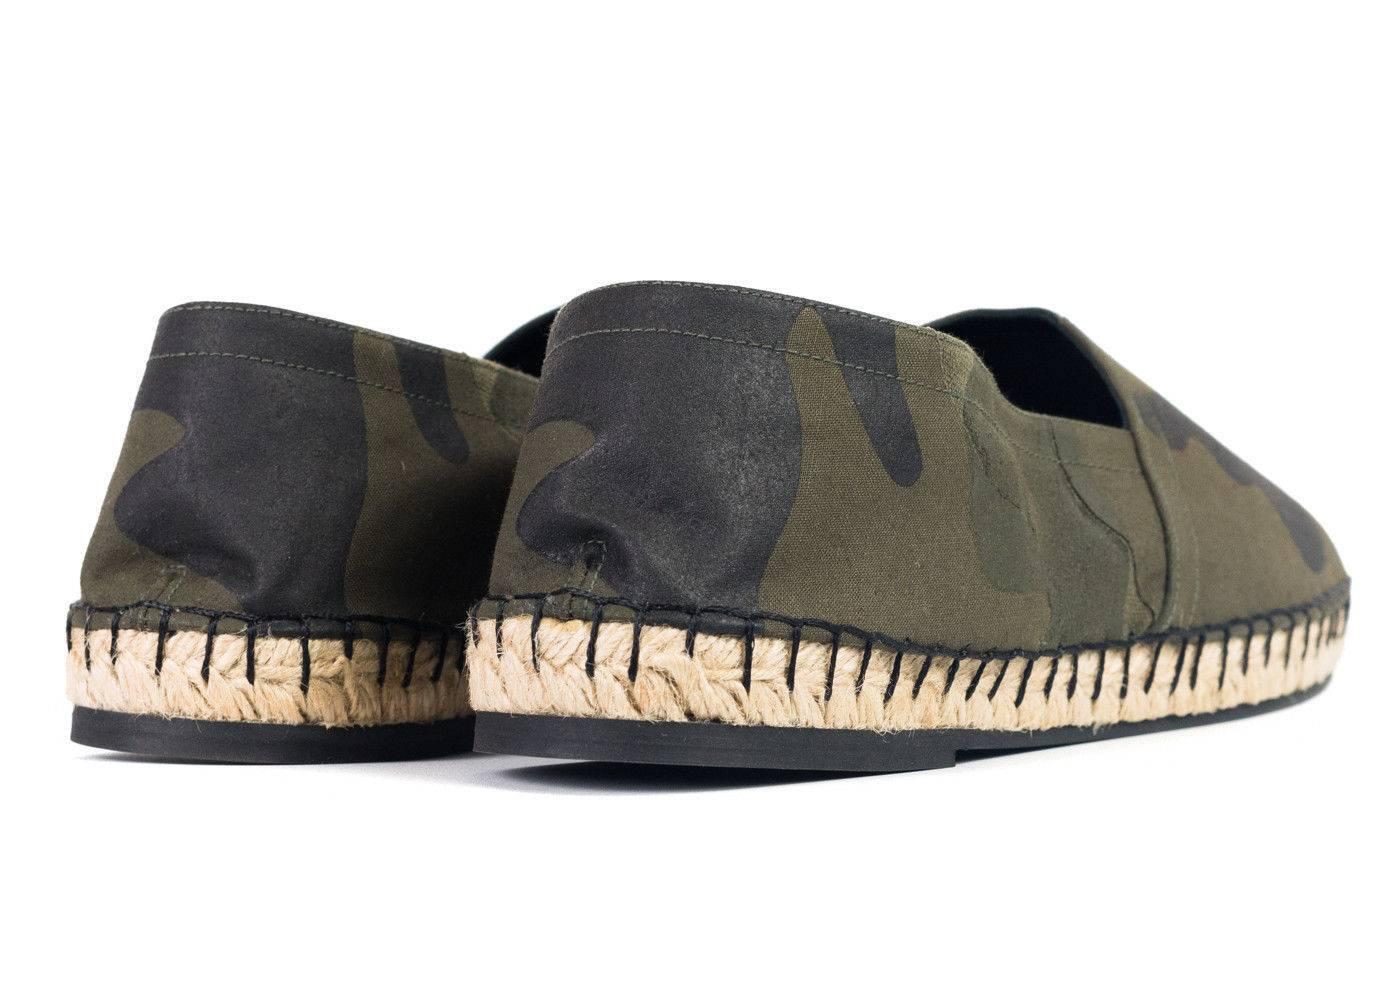 Canvas espadrilles featuring camouflage pattern in tones of 'army' green throughout. Woven accent in taupe at round toe. Blanket stitching at welt. Braided jute midsole. Rubber sole in tan. Tonal stitching. Perfect for a pair of Jeans a Black